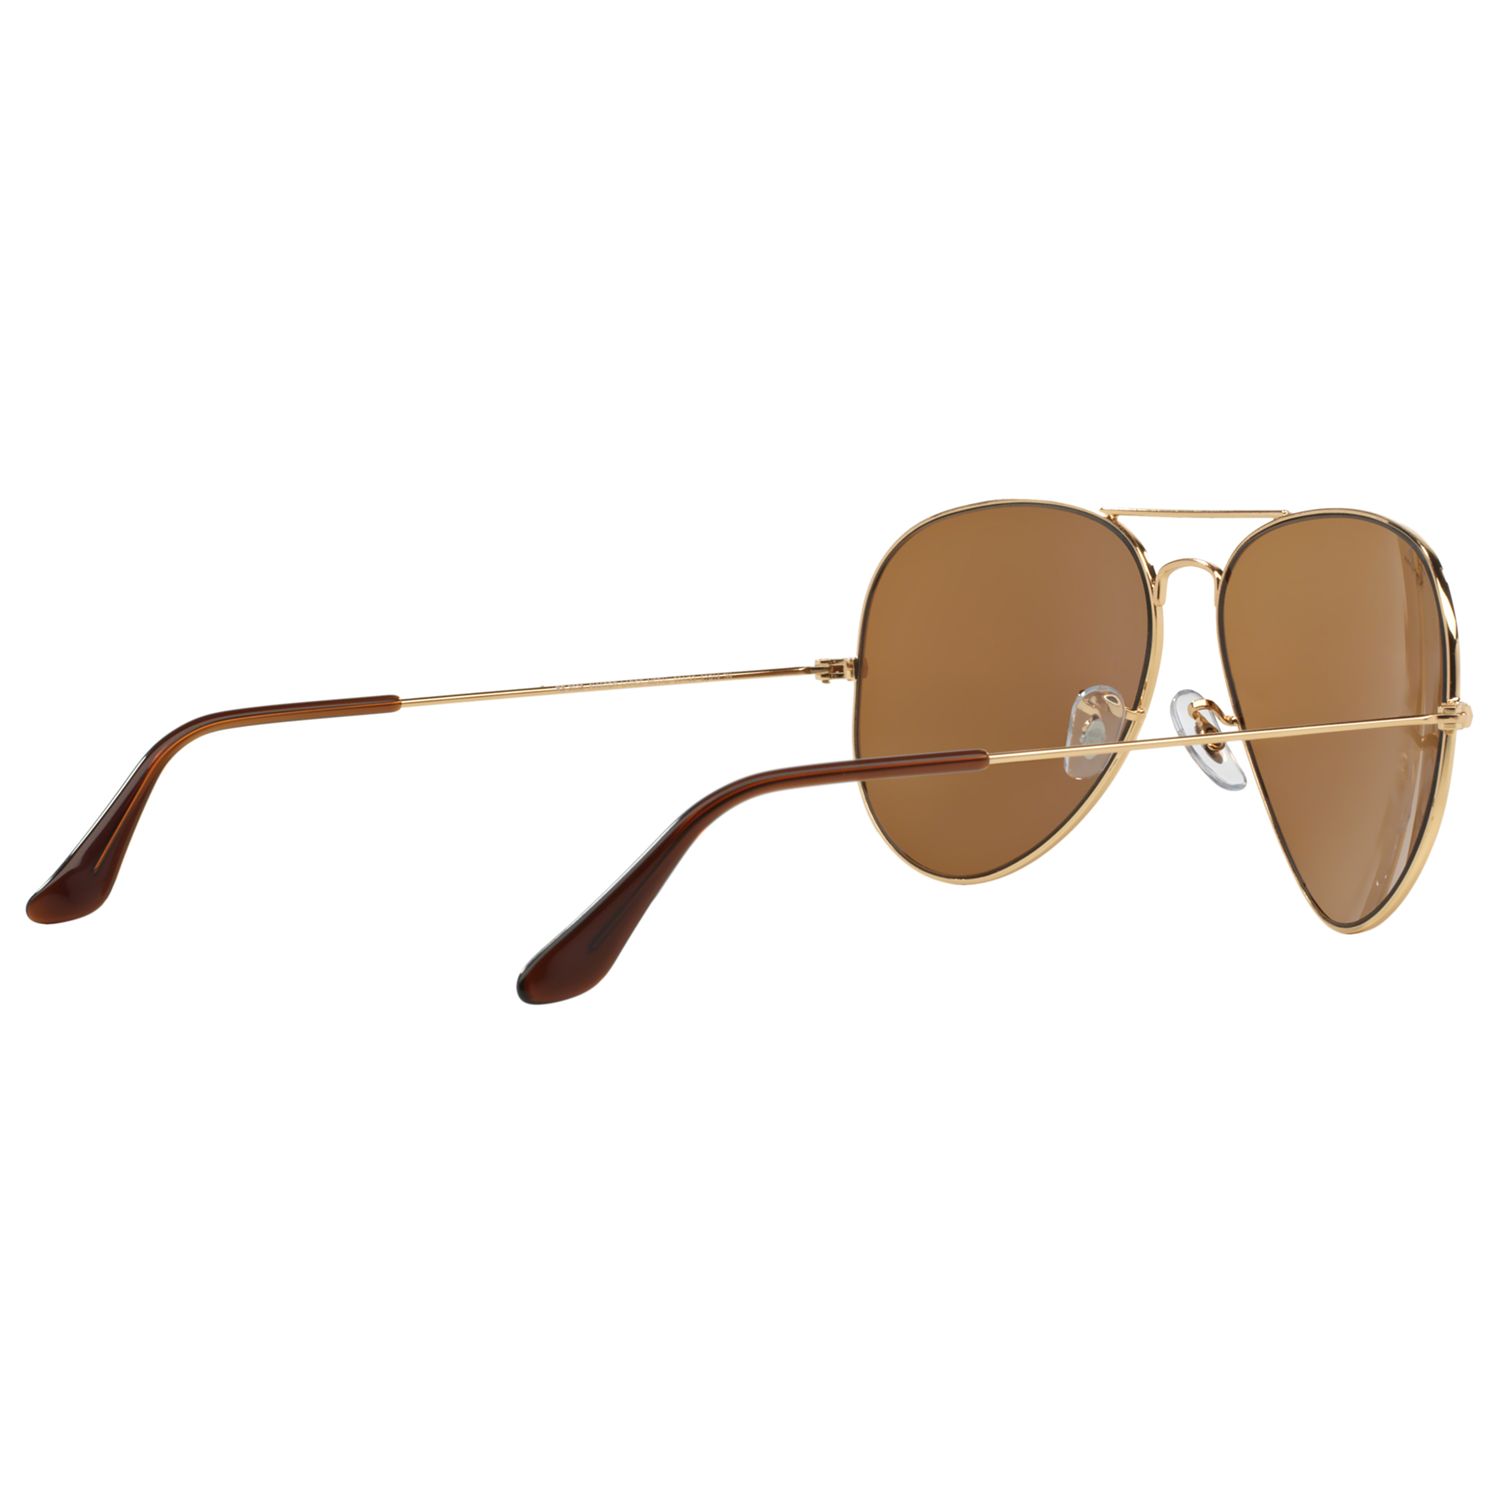 Ray-Ban RB3025 Iconic Aviator Sunglasses, Gold/Brown at John Lewis & Partners